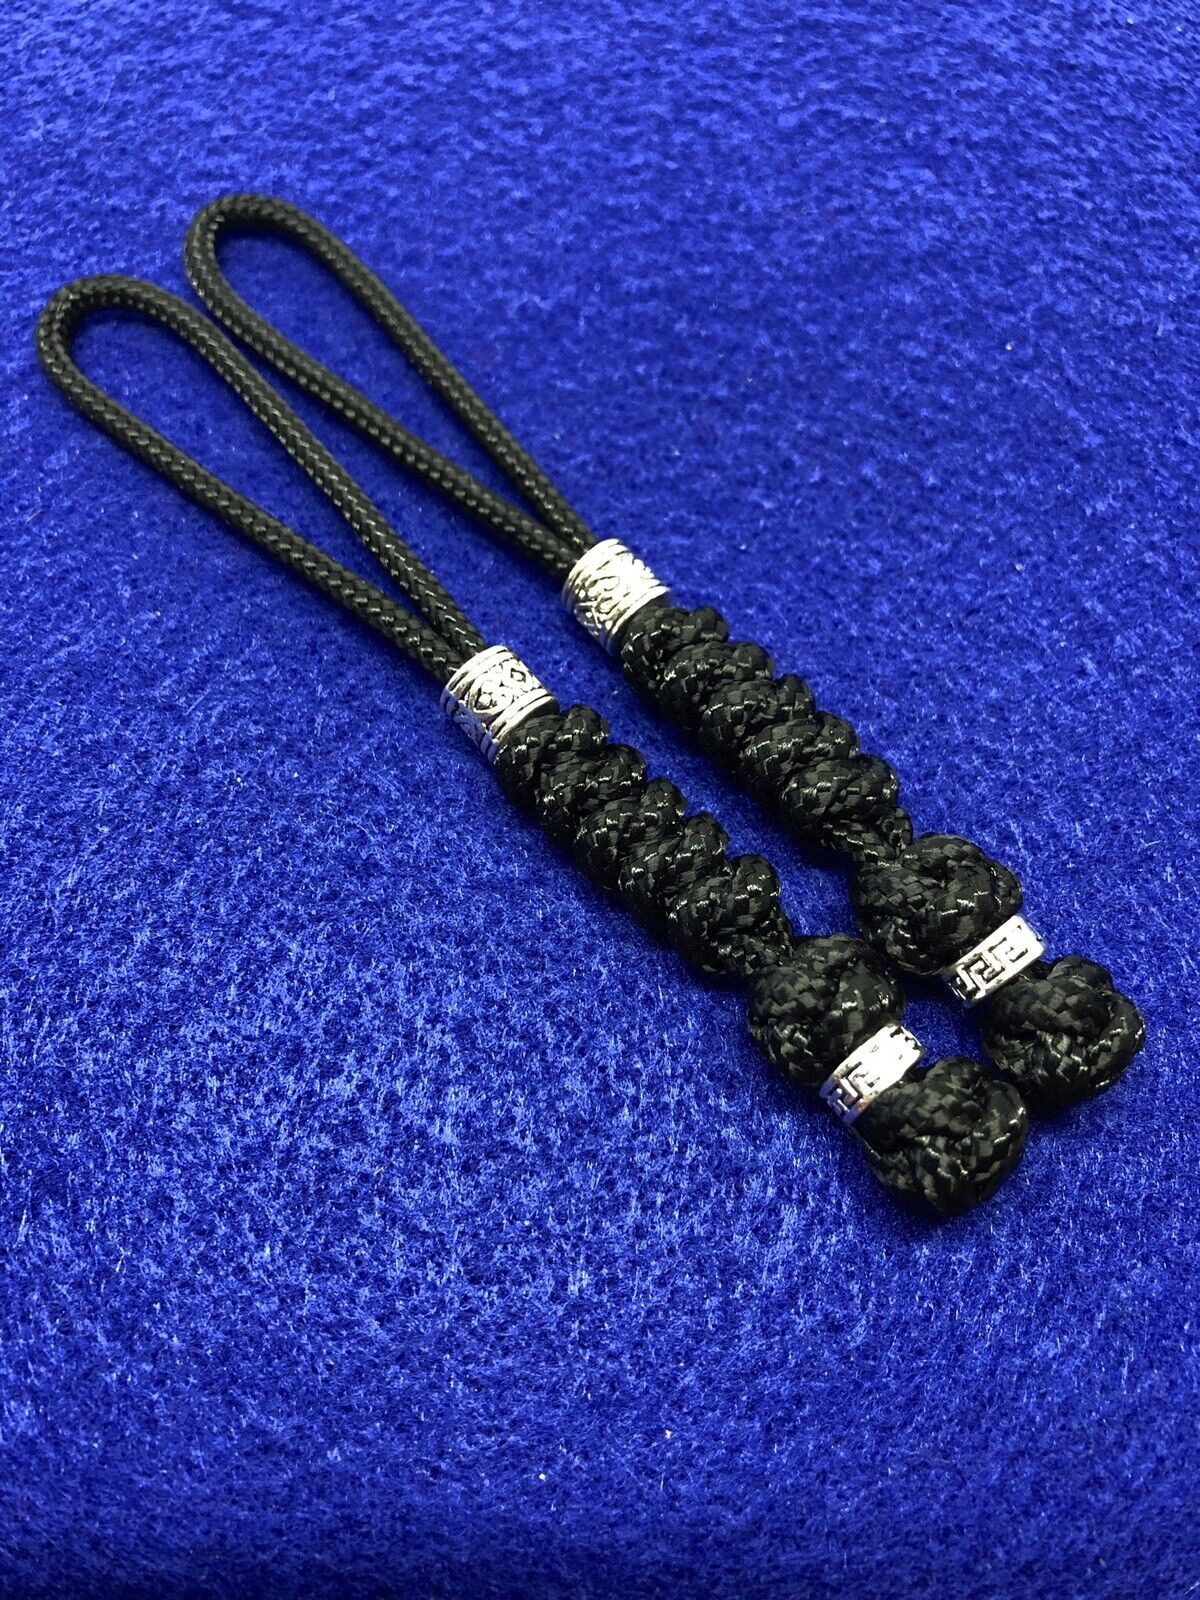 325 Paracord Knife Lanyard Shorties 2pk, Black Snake Knot With Beads